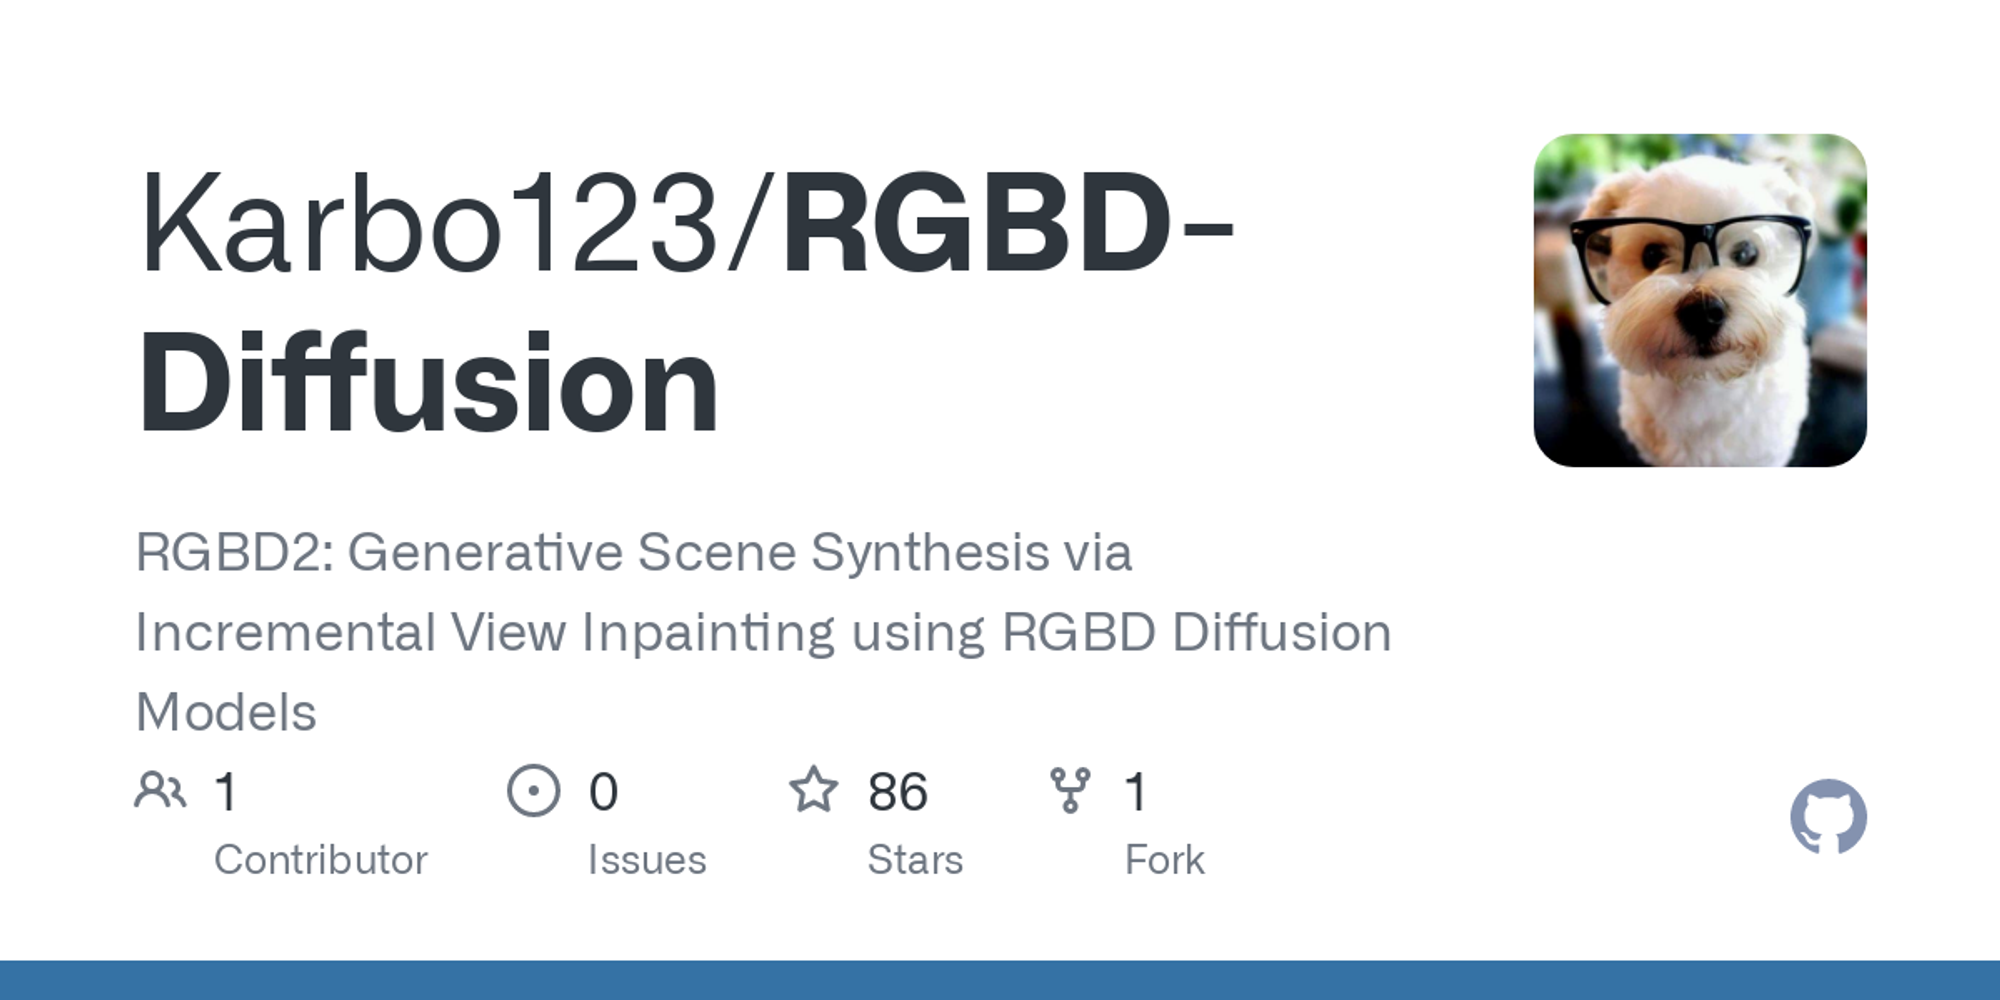 GitHub - Karbo123/RGBD-Diffusion: RGBD2: Generative Scene Synthesis via Incremental View Inpainting using RGBD Diffusion Models